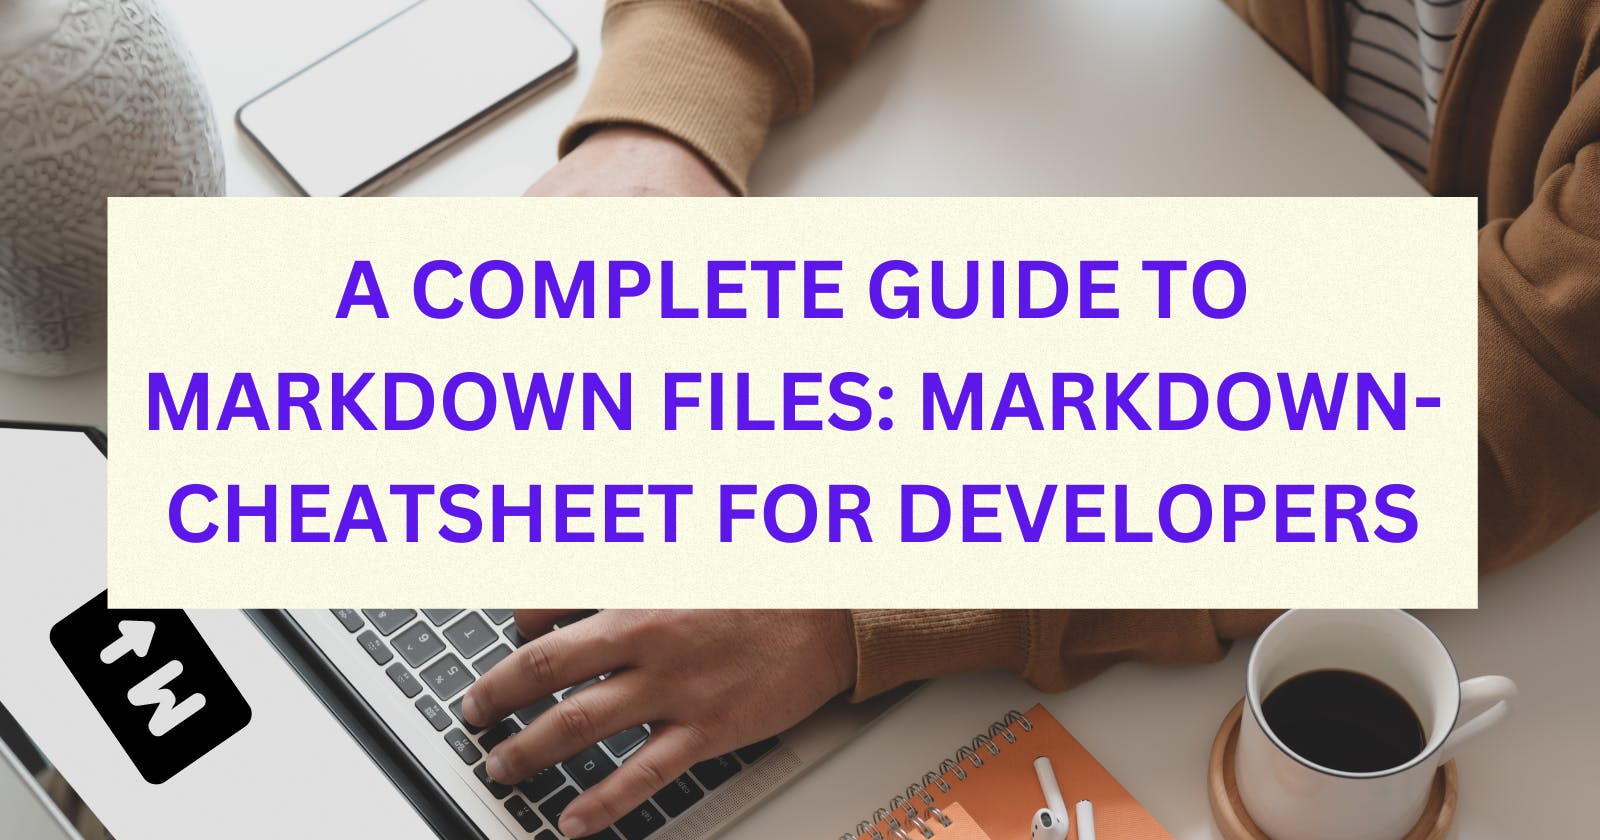 A complete guide for Markdown files